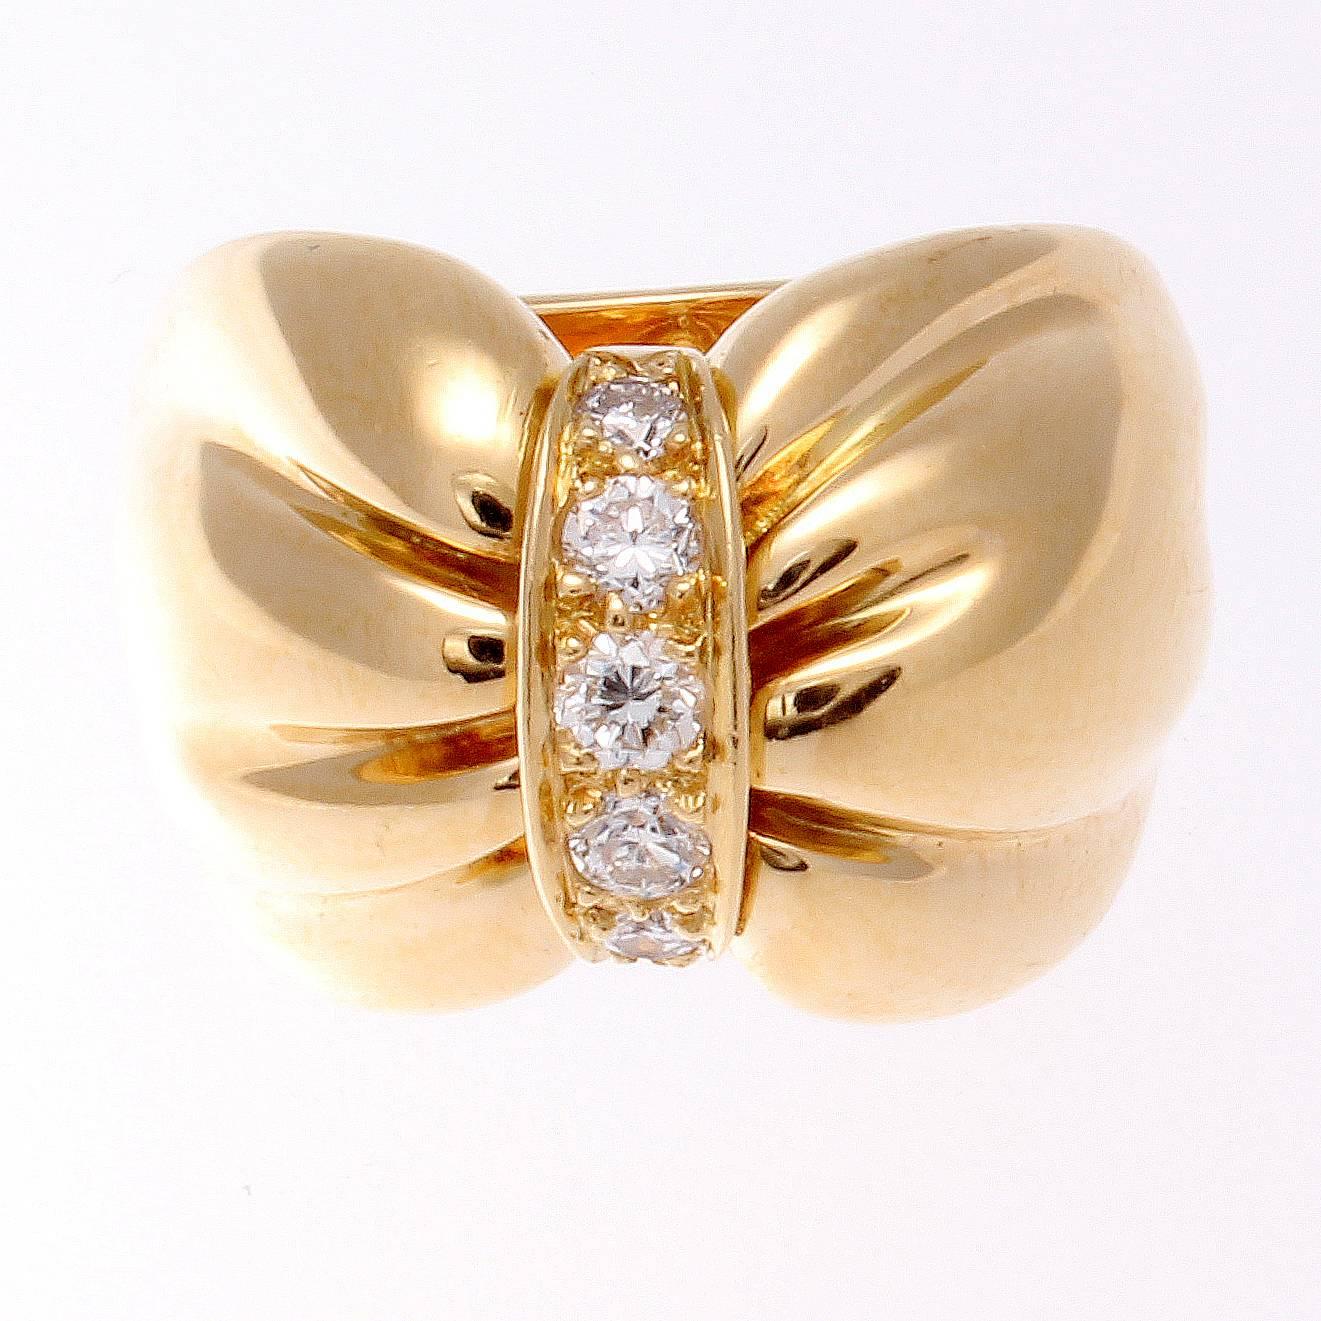 Van Cleef & Arpels, a long rich history of trend setting fashion that is still relevant today. The classic bow motif that has been fashioned with near colorless diamonds and crafted in 18k yellow gold. Signed VCA and numbered.

Ring size 5-1/4 and